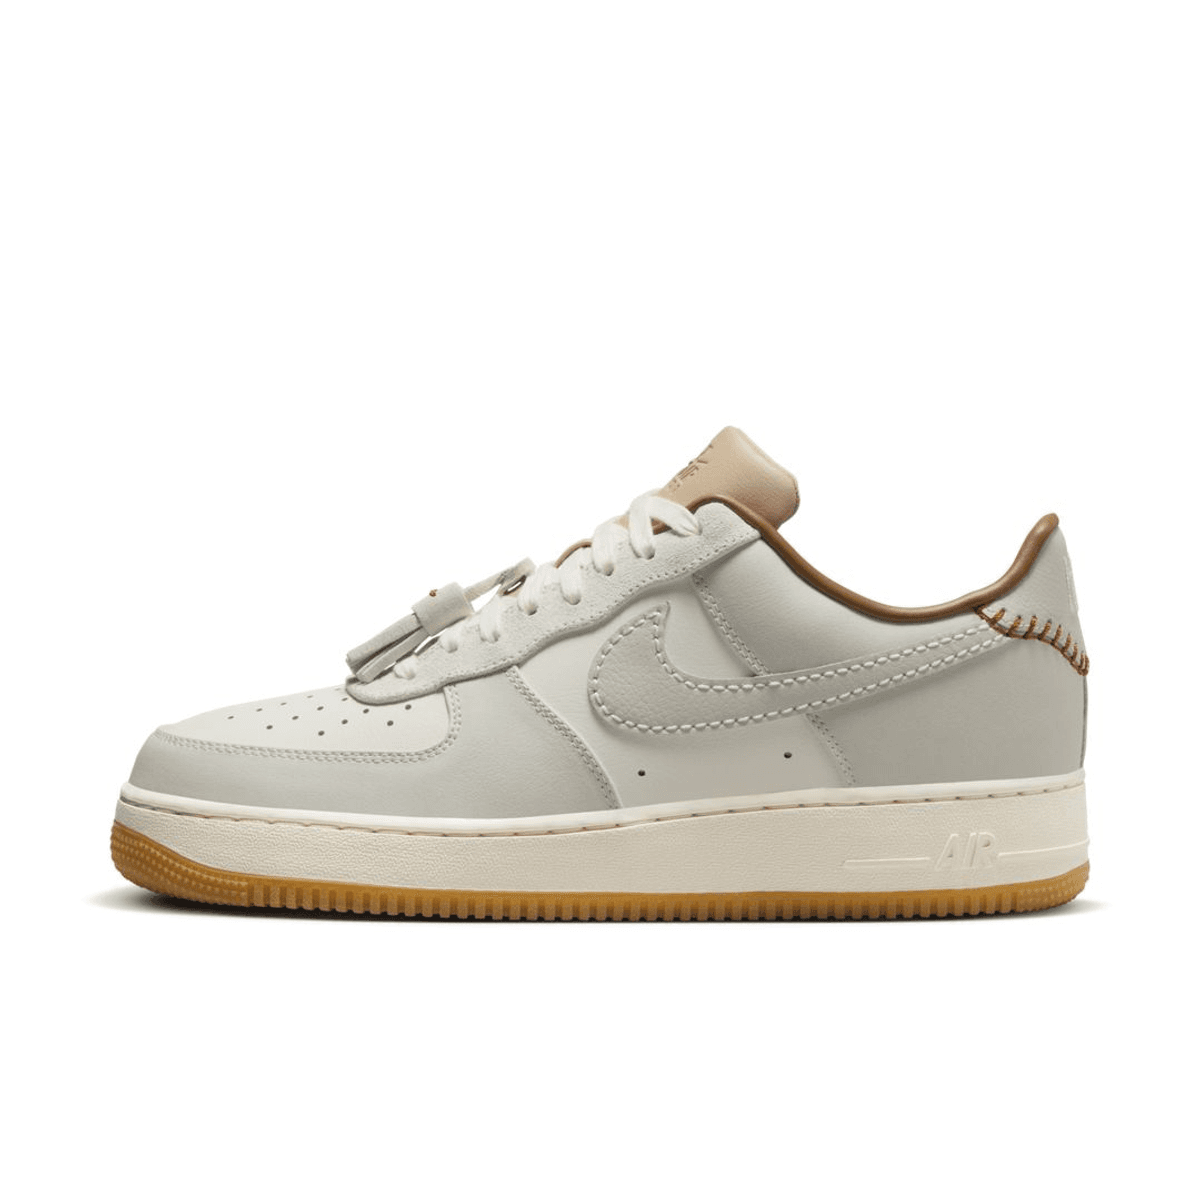 Official Look At The Nike Air Force 1 Low Tassels "Light Bone"